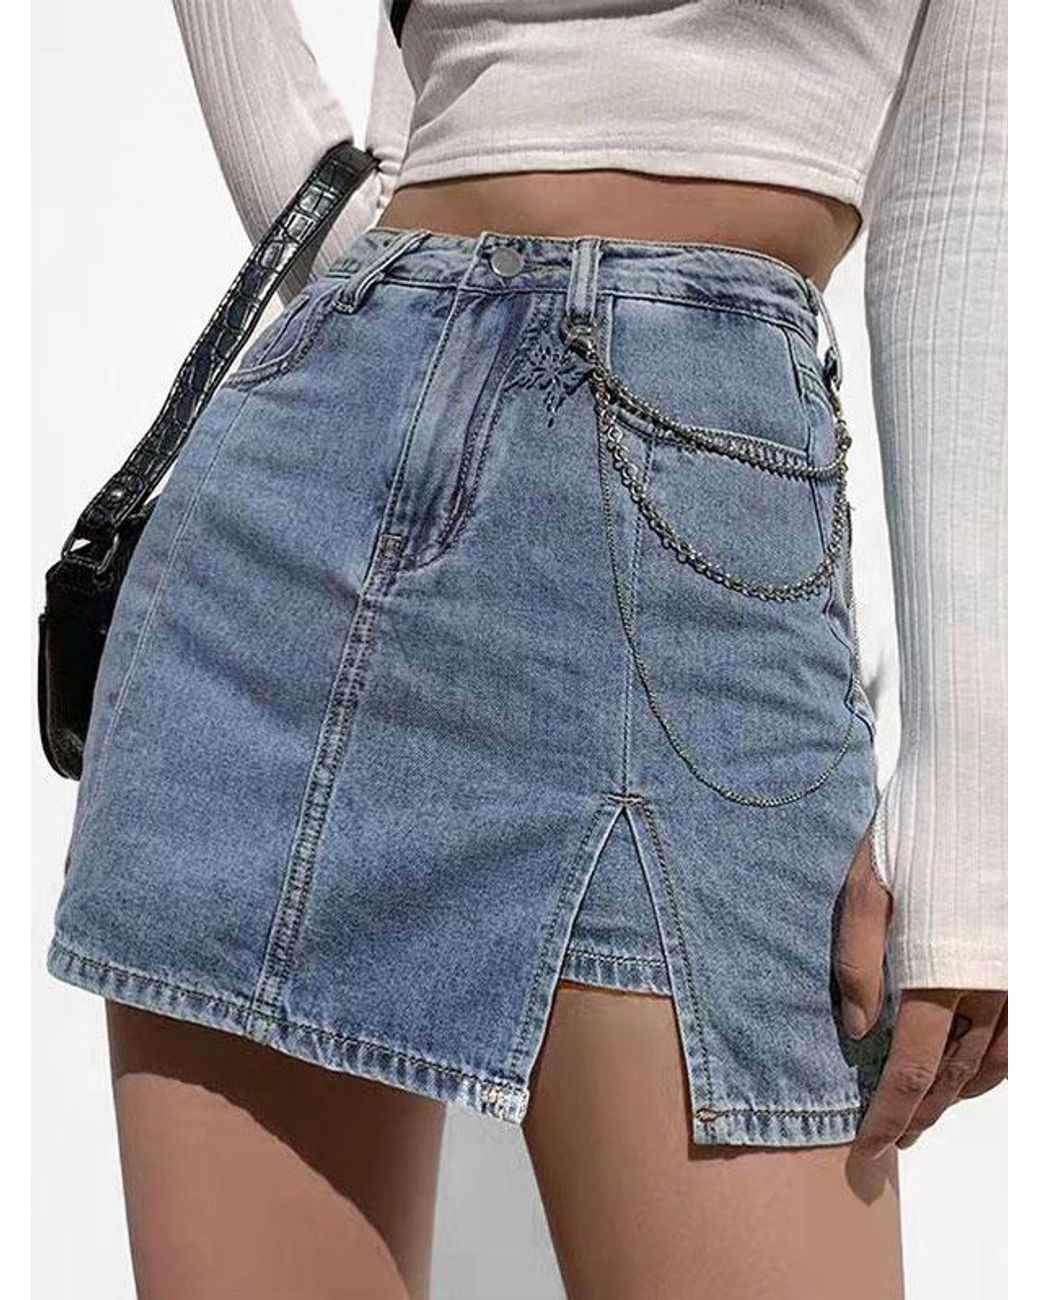 Zaful Slit Mini Jean Skirt With Safety Shorts (no Chain) in Blue | Lyst